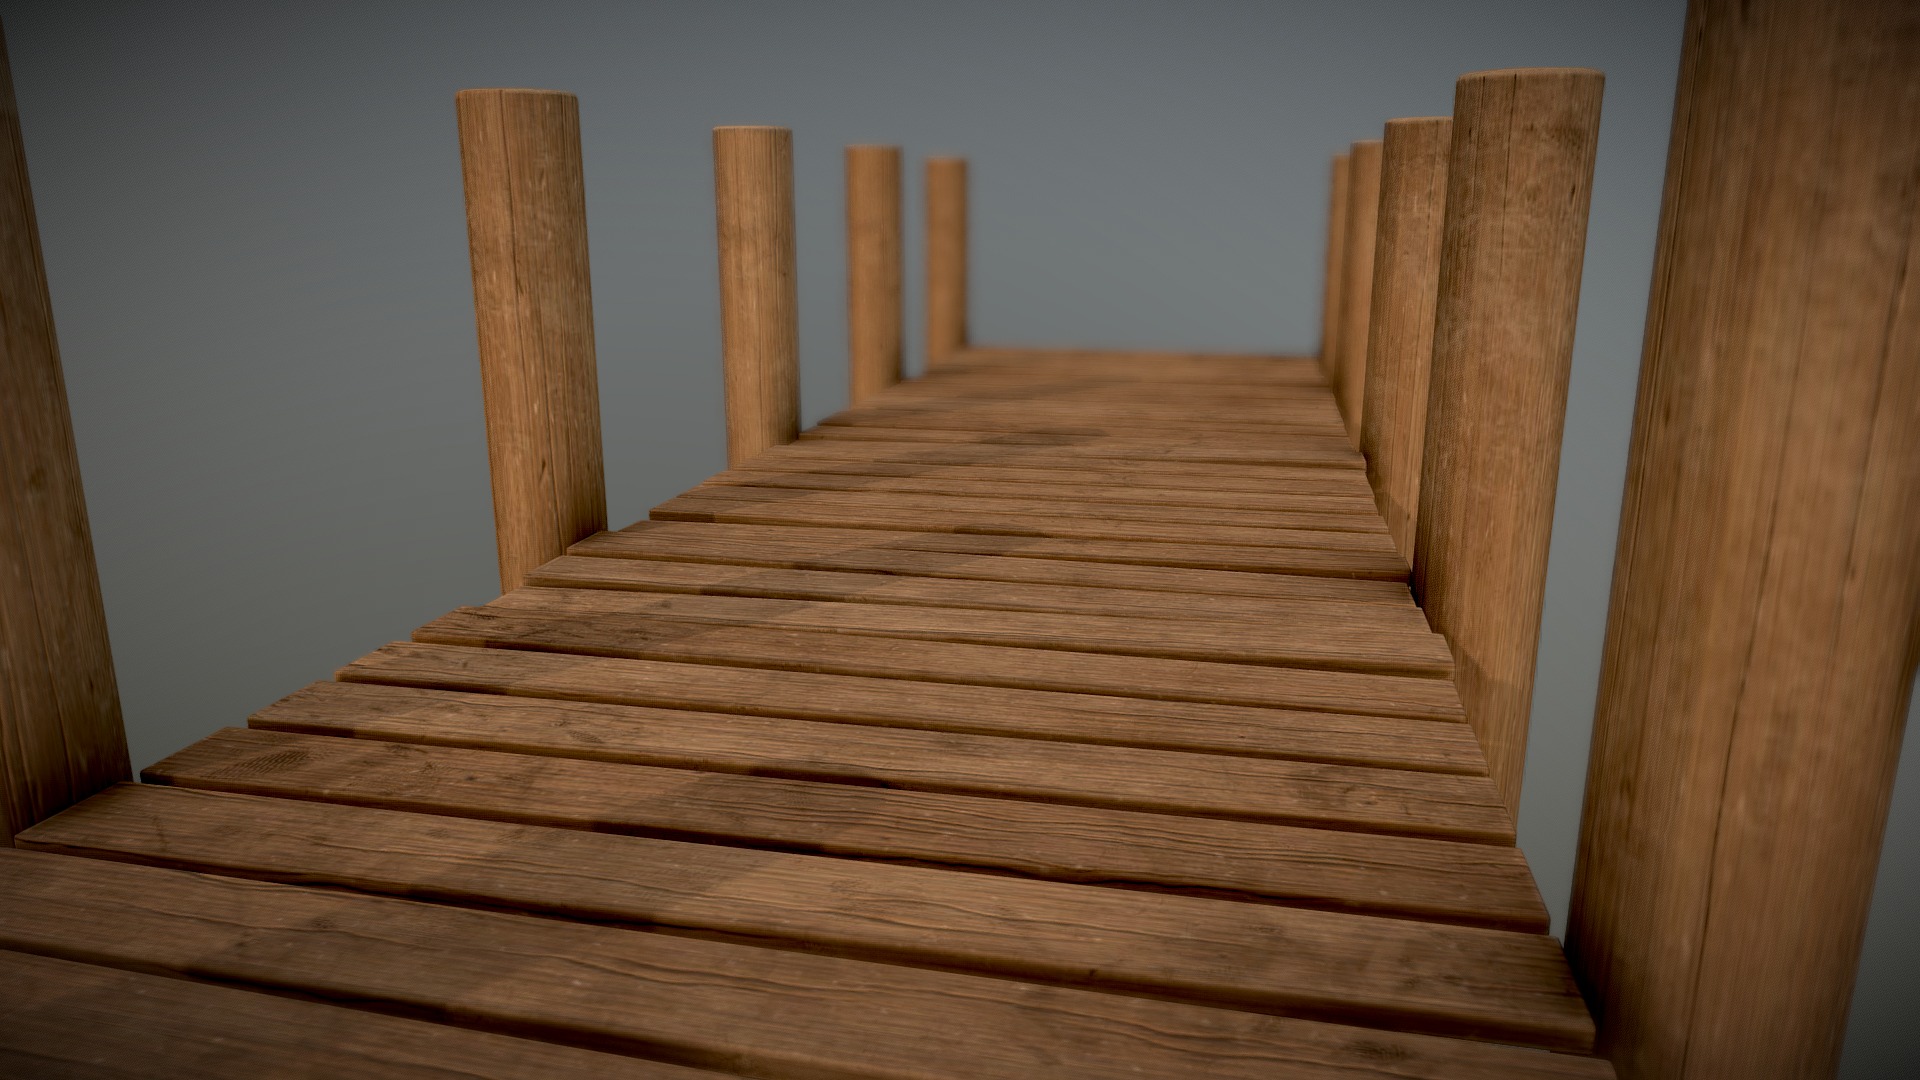 3D model Lakeside Pier - This is a 3D model of the Lakeside Pier. The 3D model is about a wood floor with a wood frame.